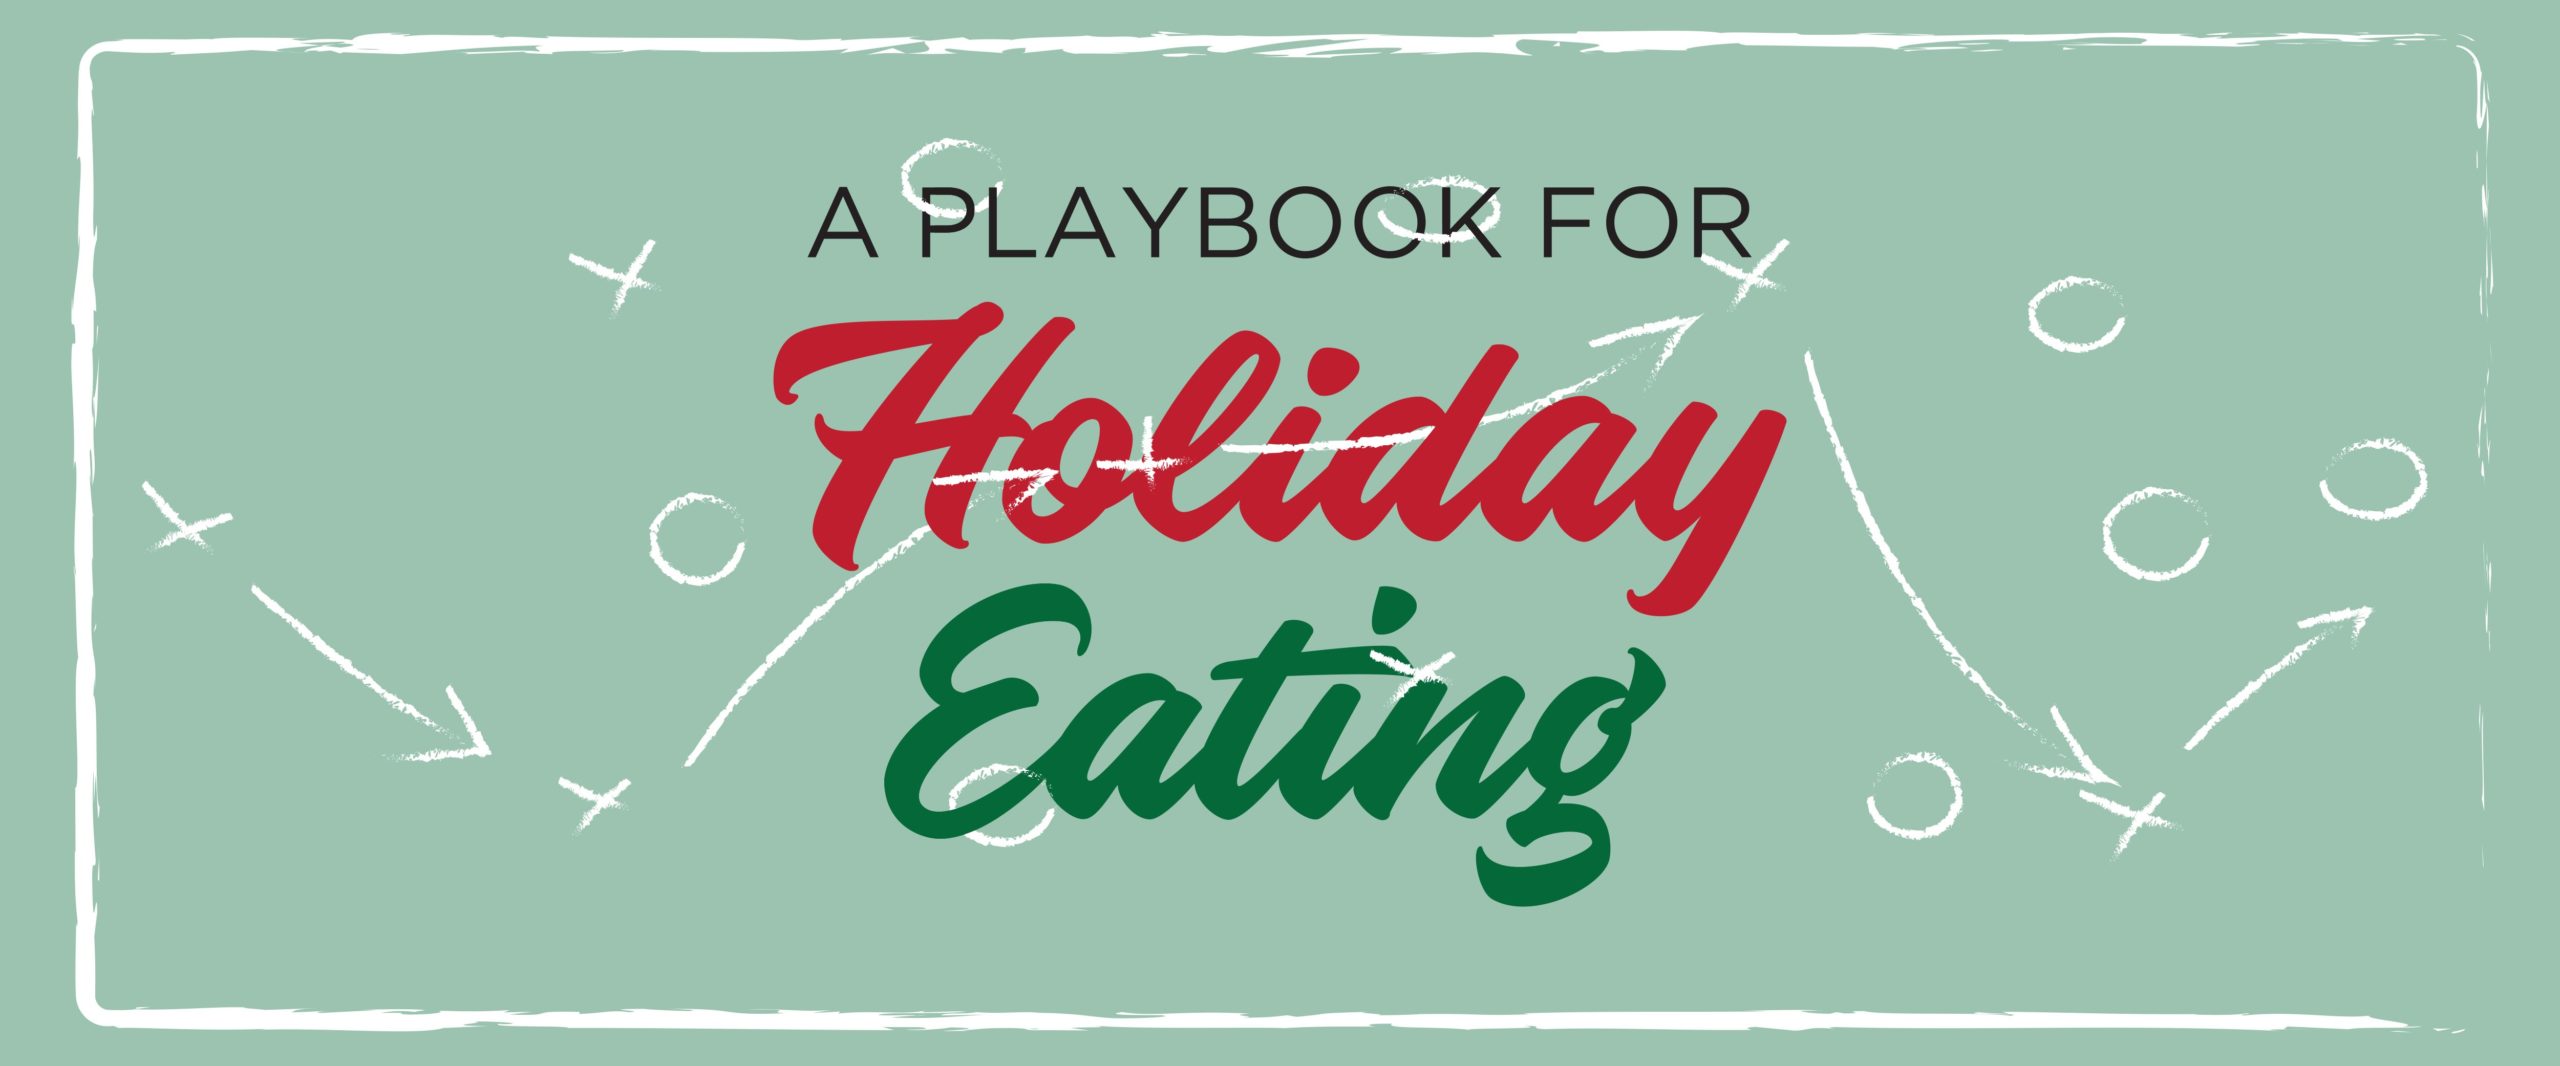 A play book for holiday eating